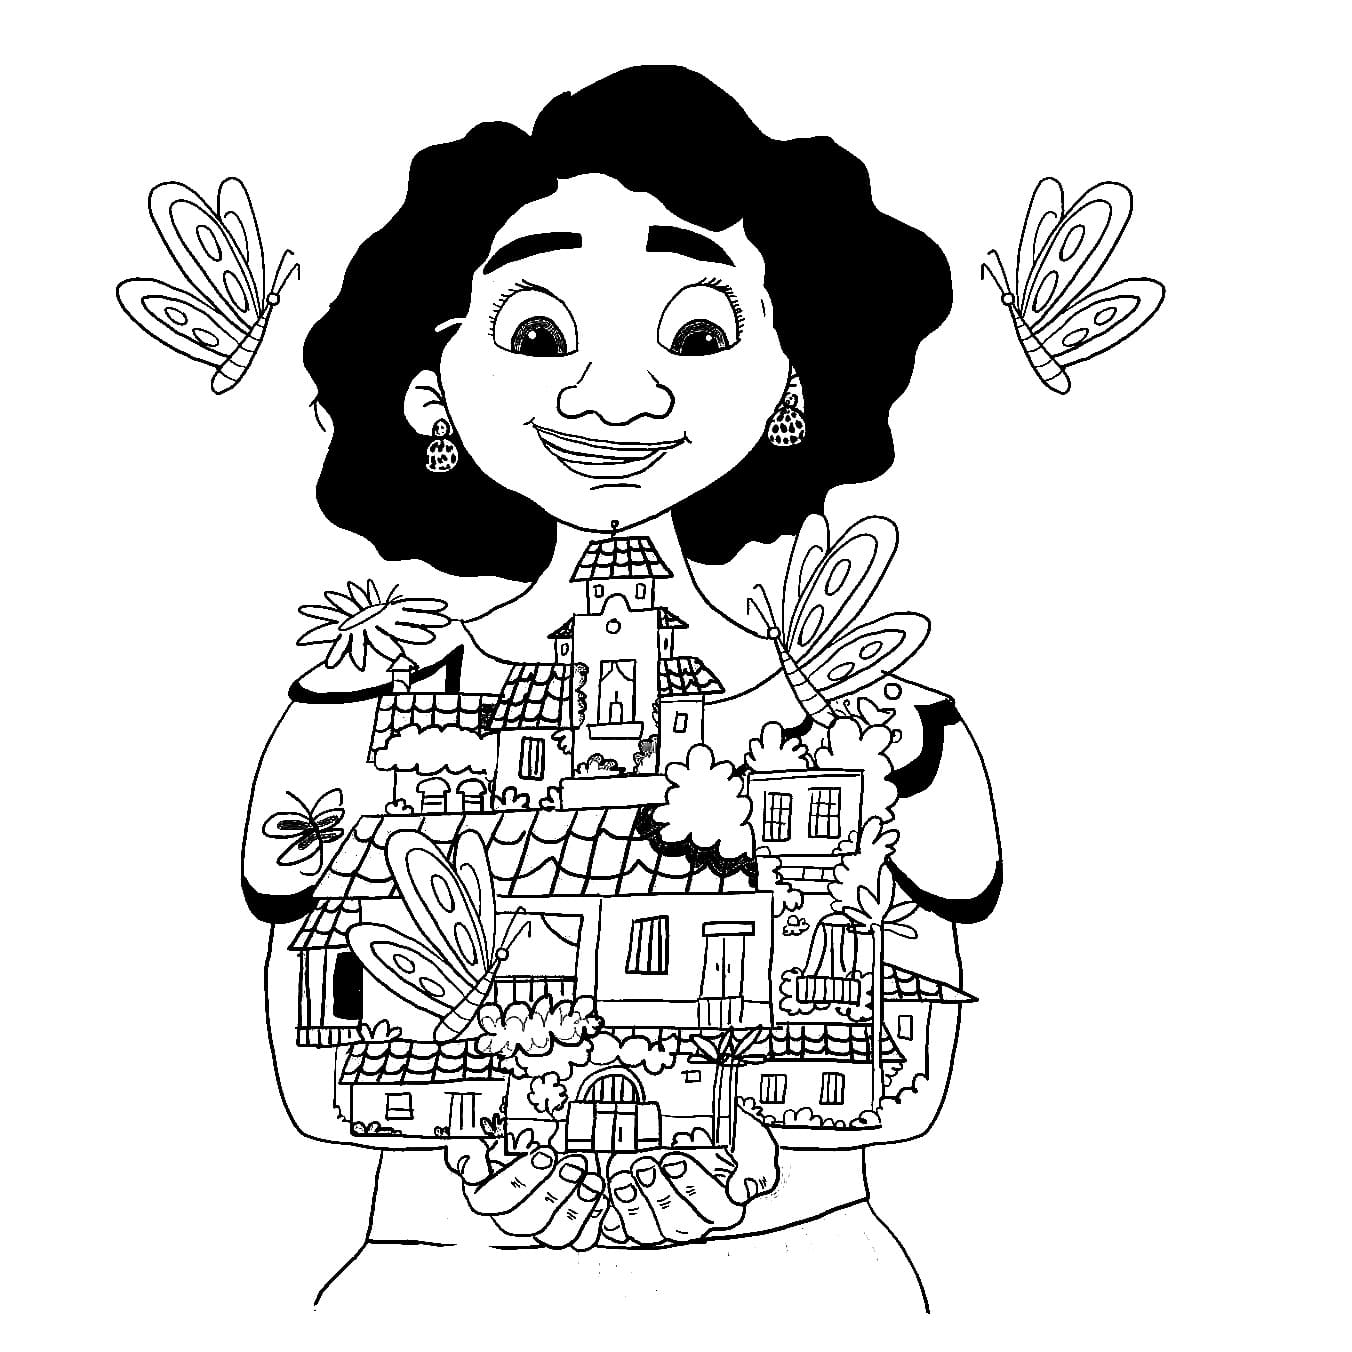 Mirabel Encanto coloring page - Download, Print or Color Online for Free